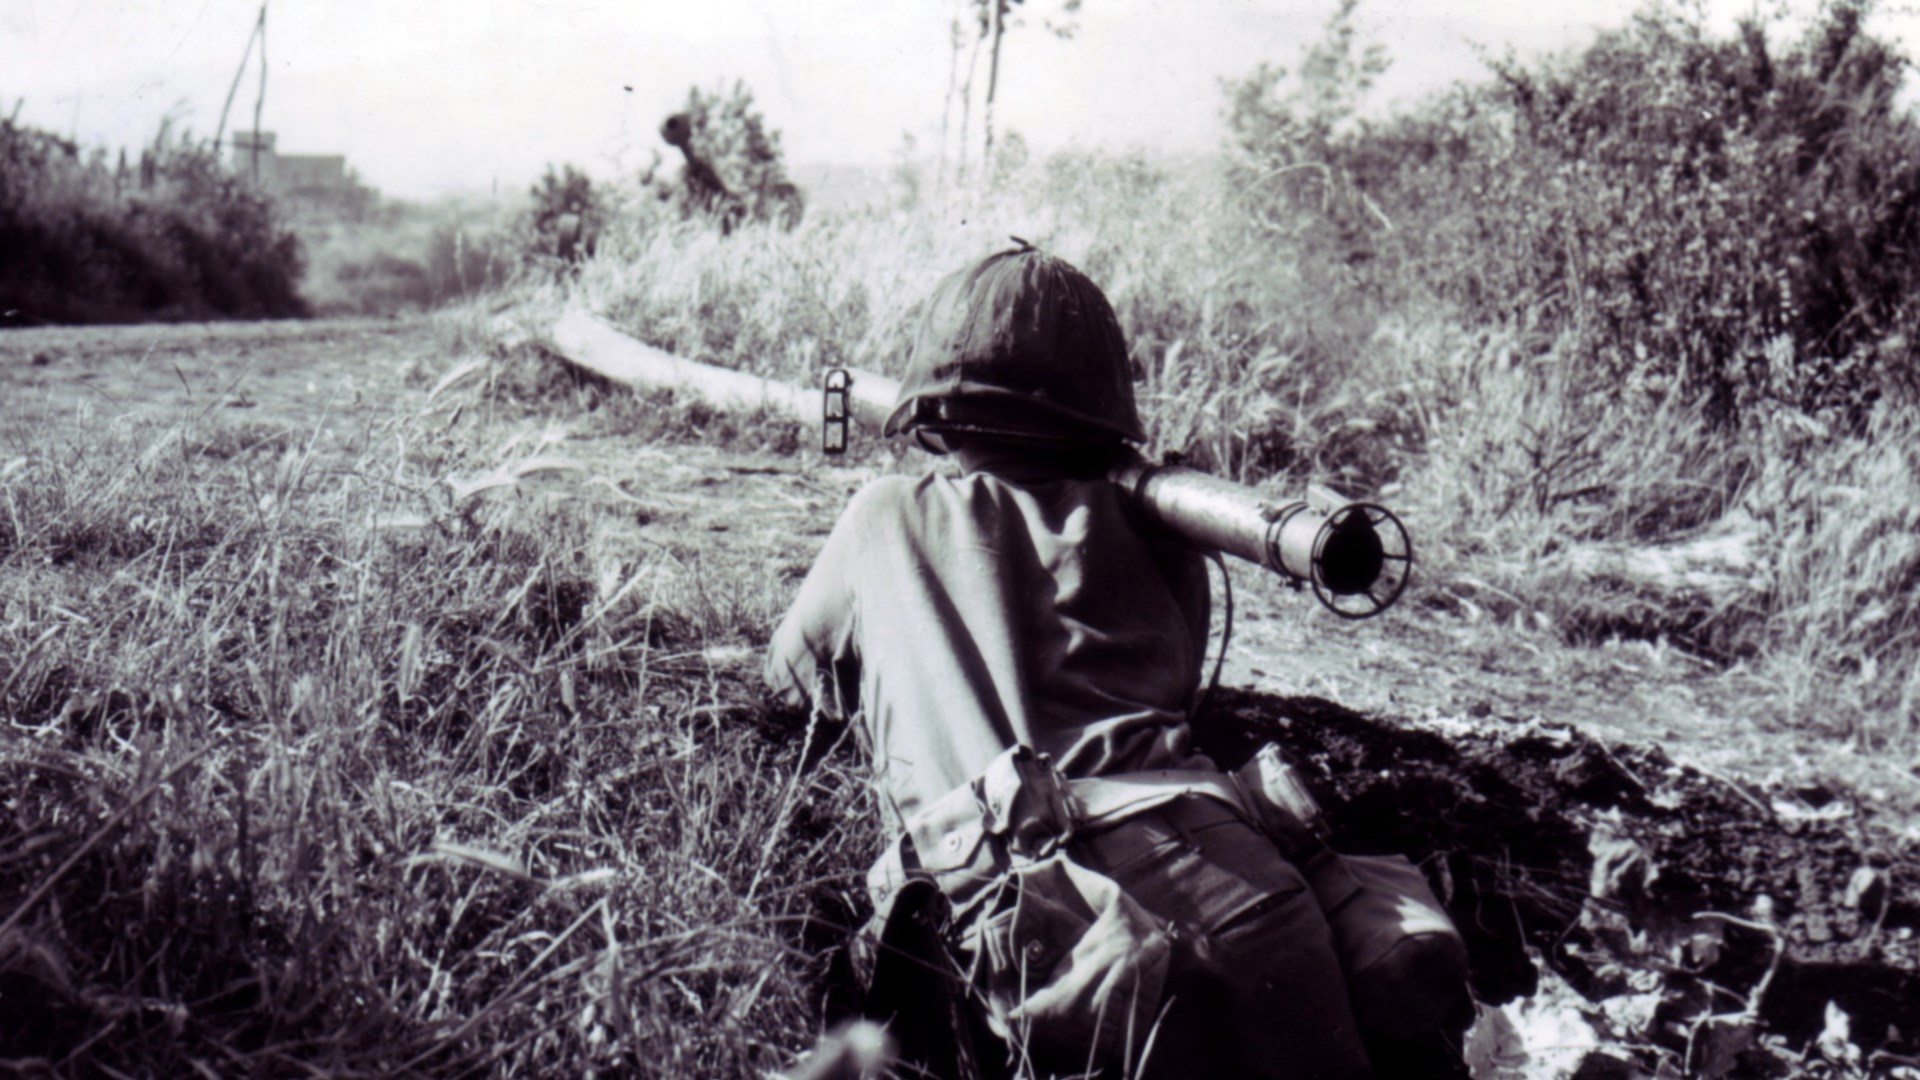 The 2.36-inch Bazooka, in use with the 36th Infantry Division at Velletri, Italy during May 1944.